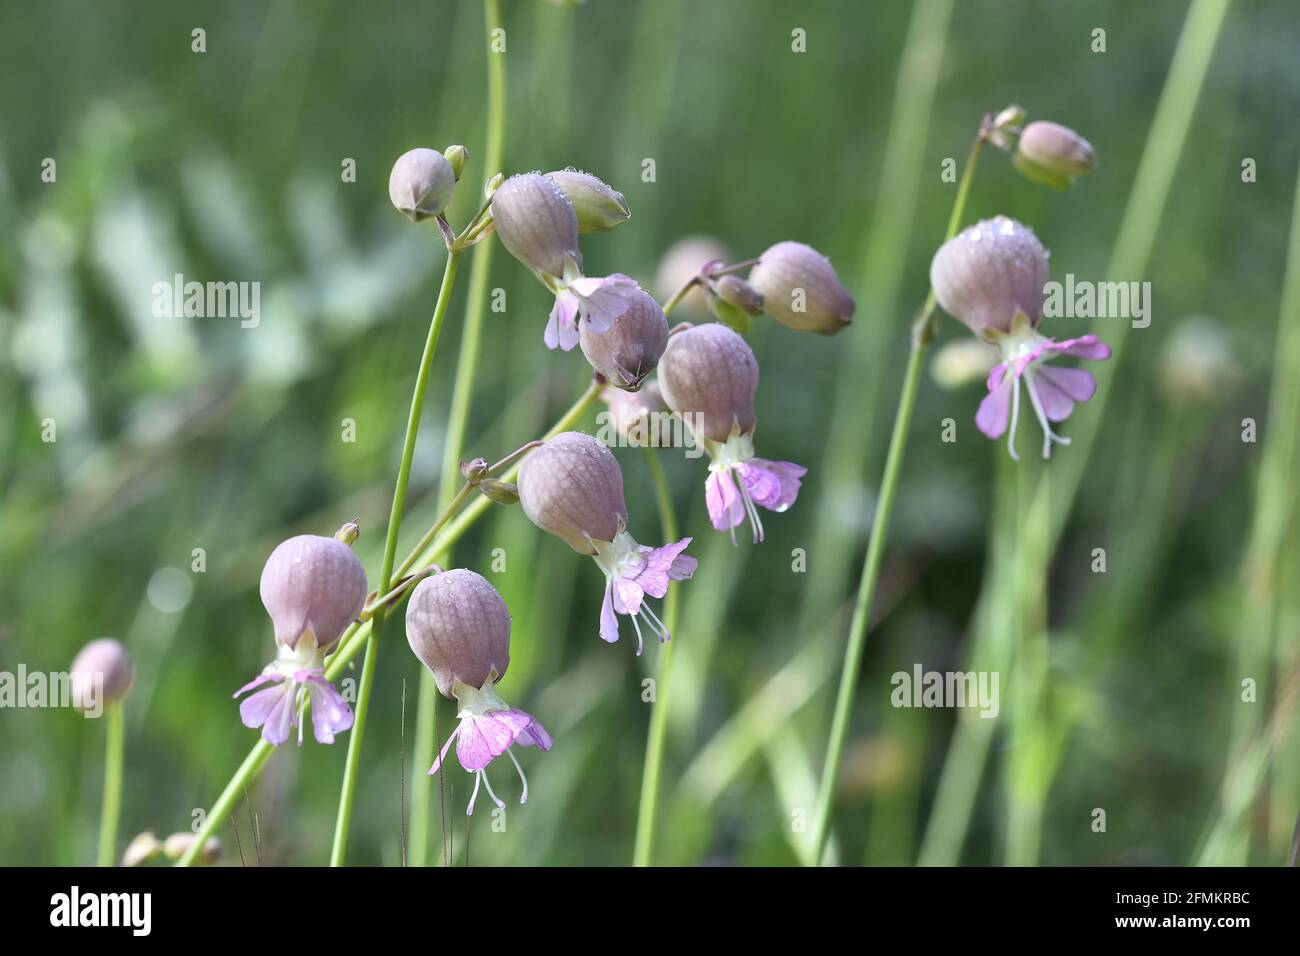 Detail of the white and pink bellied flowers of collejas (Silene vulgaris) in the field Stock Photo